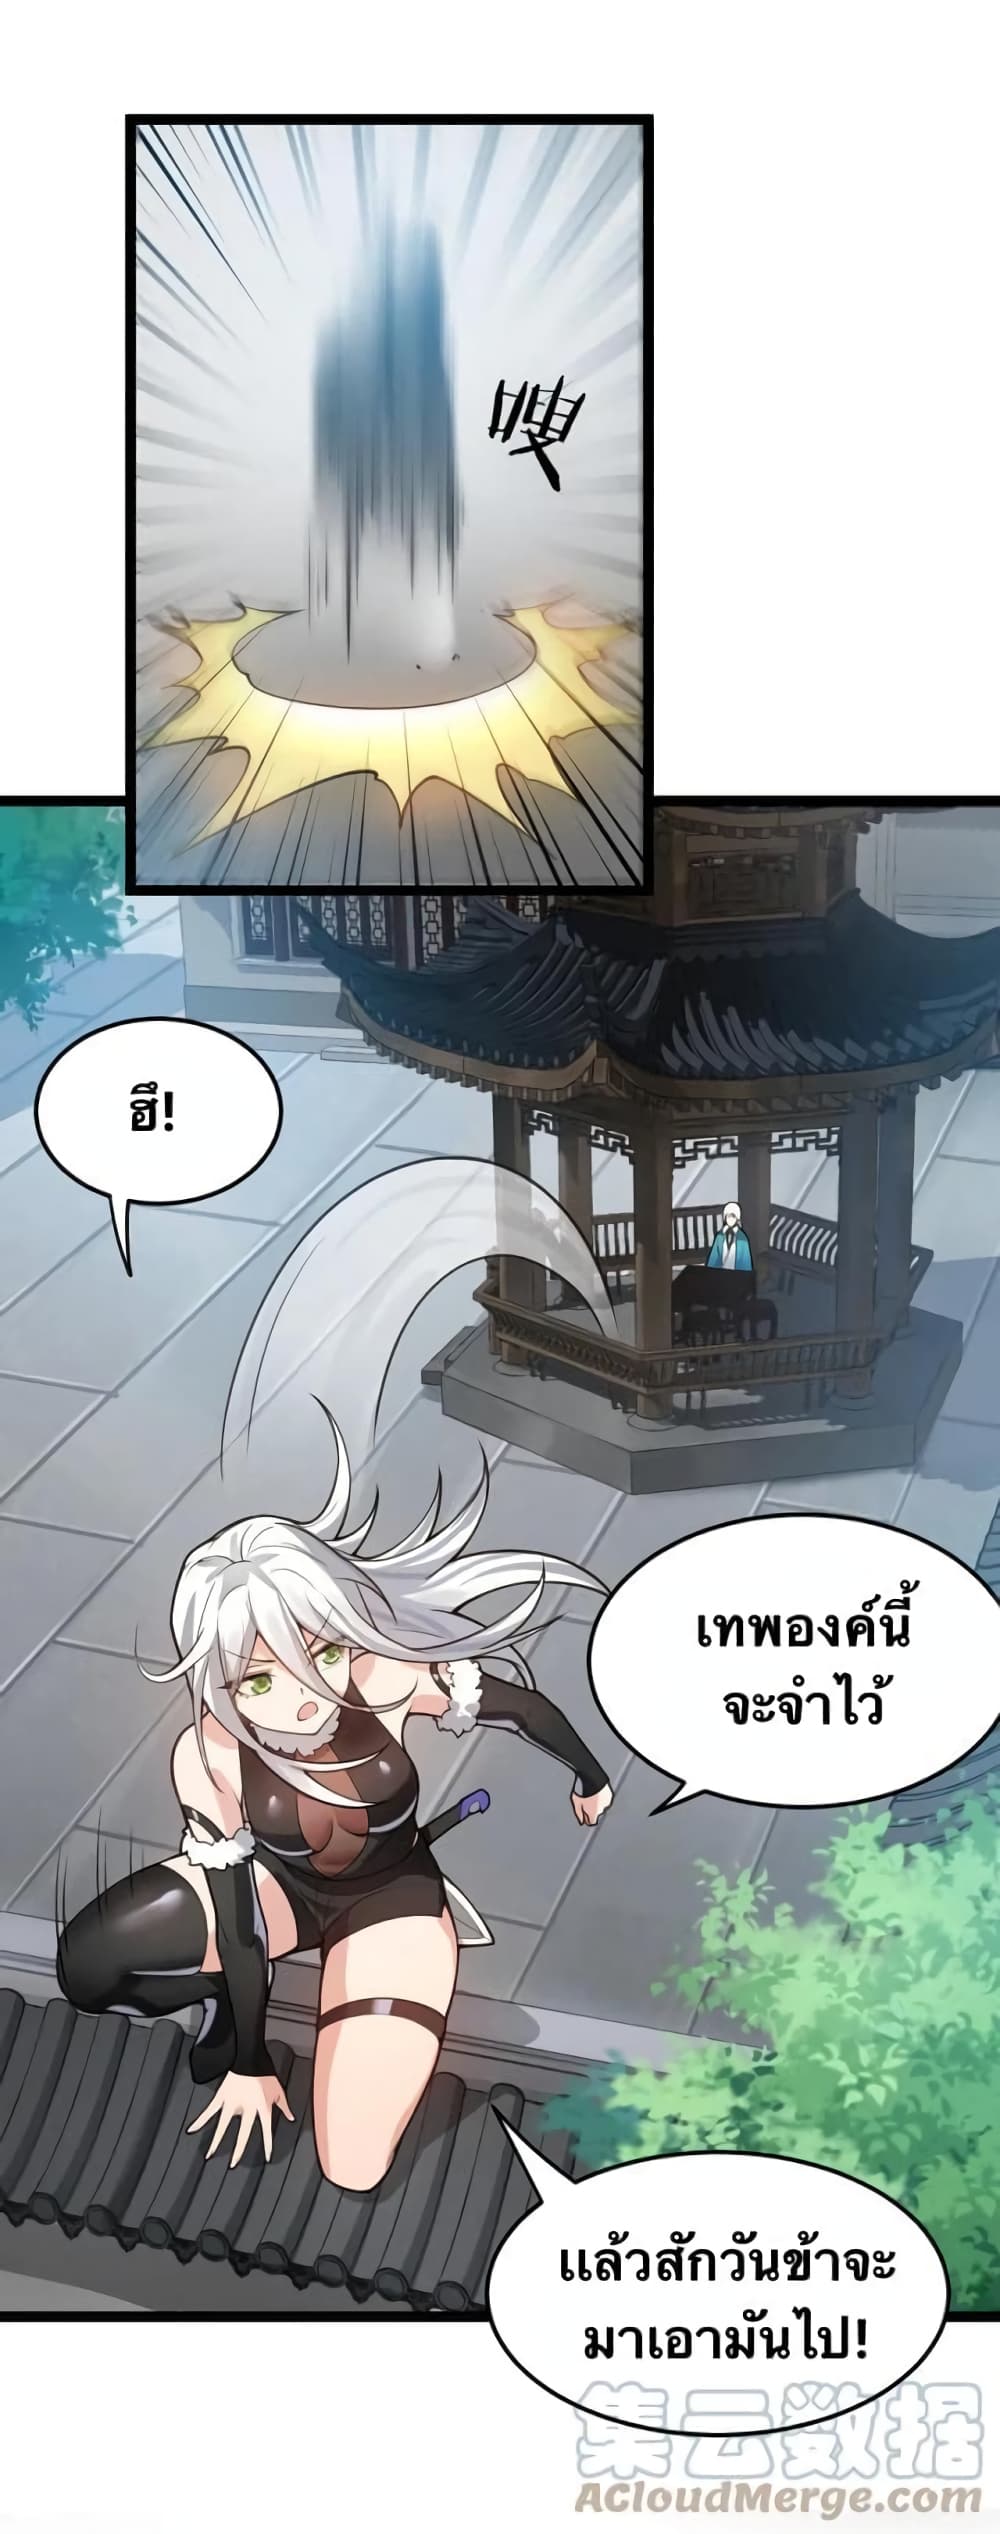 Godsian Masian from Another World ตอนที่ 94 (33)